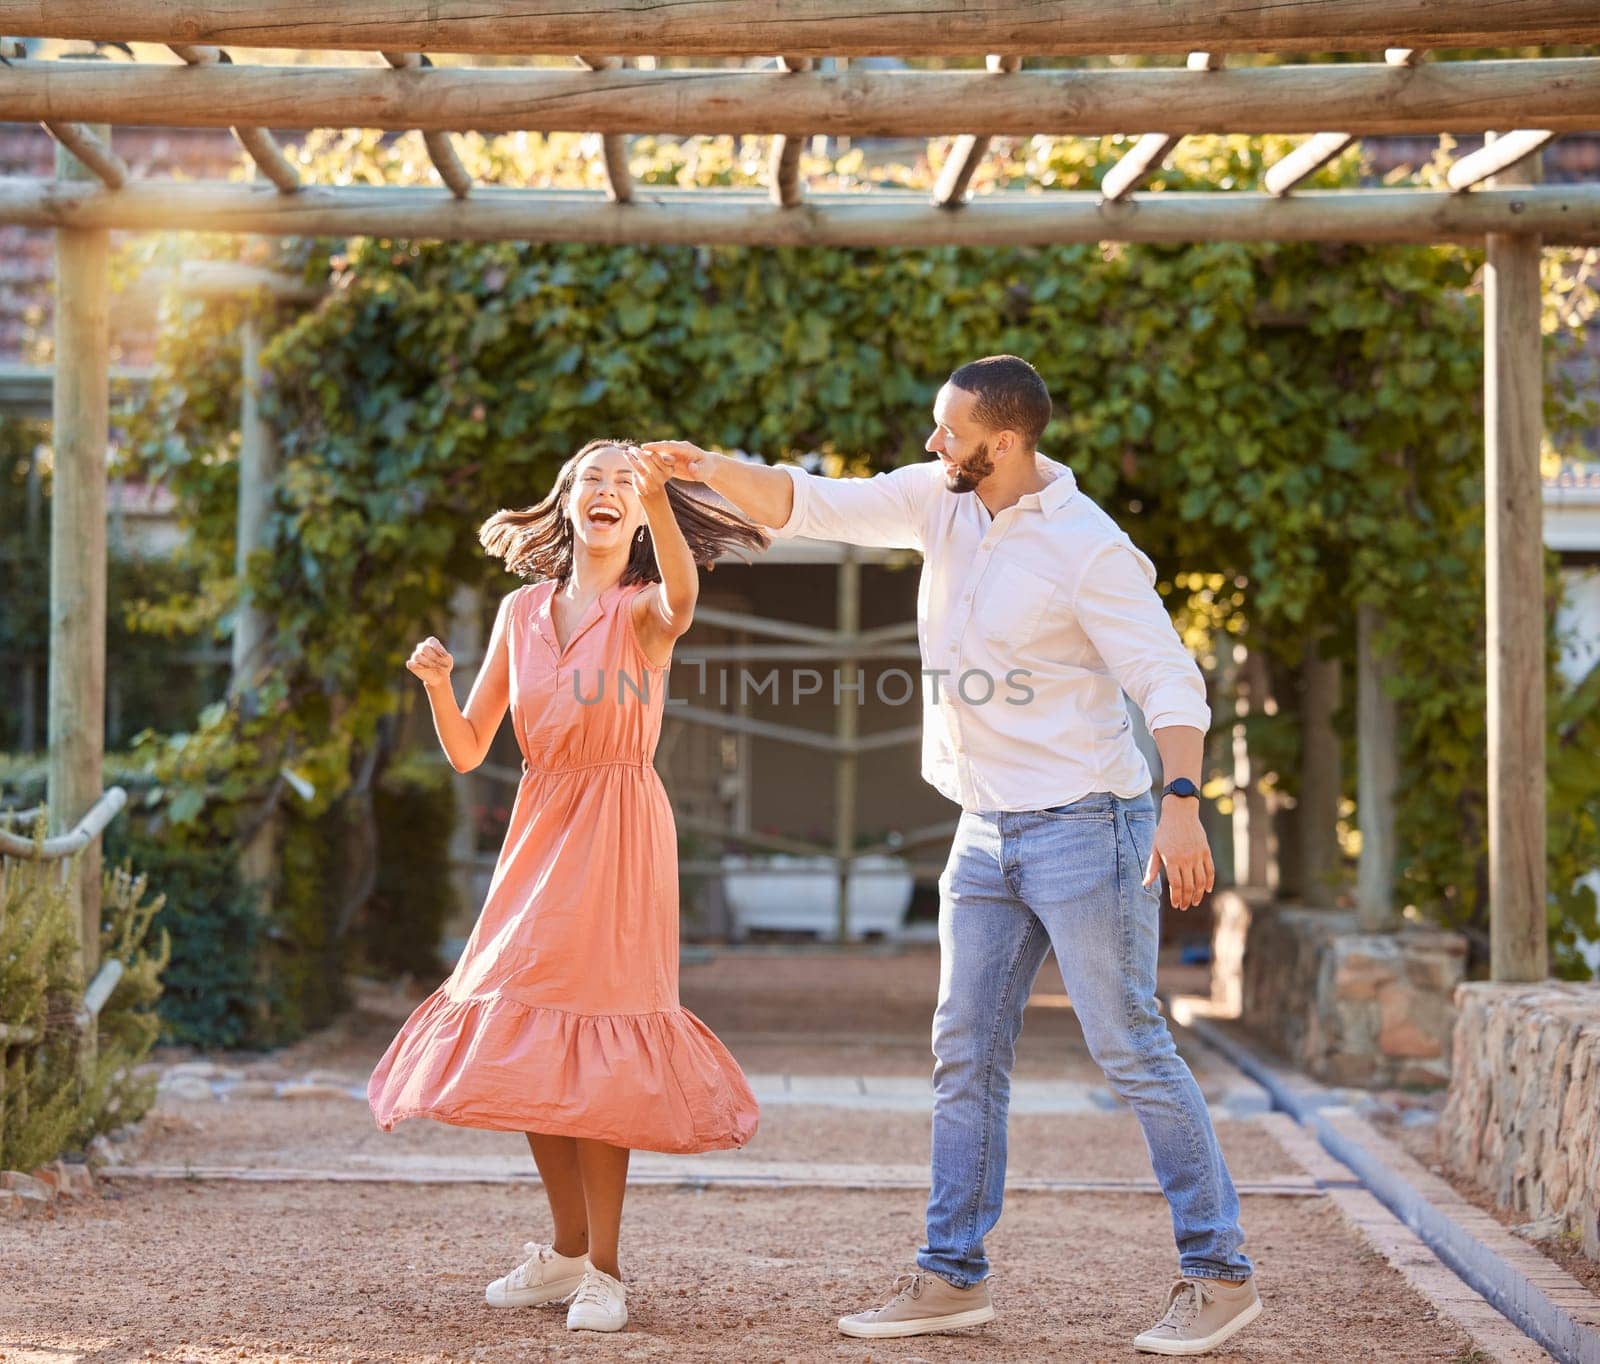 Couple, happy dancing together and outdoor love to celebrate relationship, cute dance spin and relationship activity. Woman laughing, romantic man and sunset summer romance date at nature restaurant.